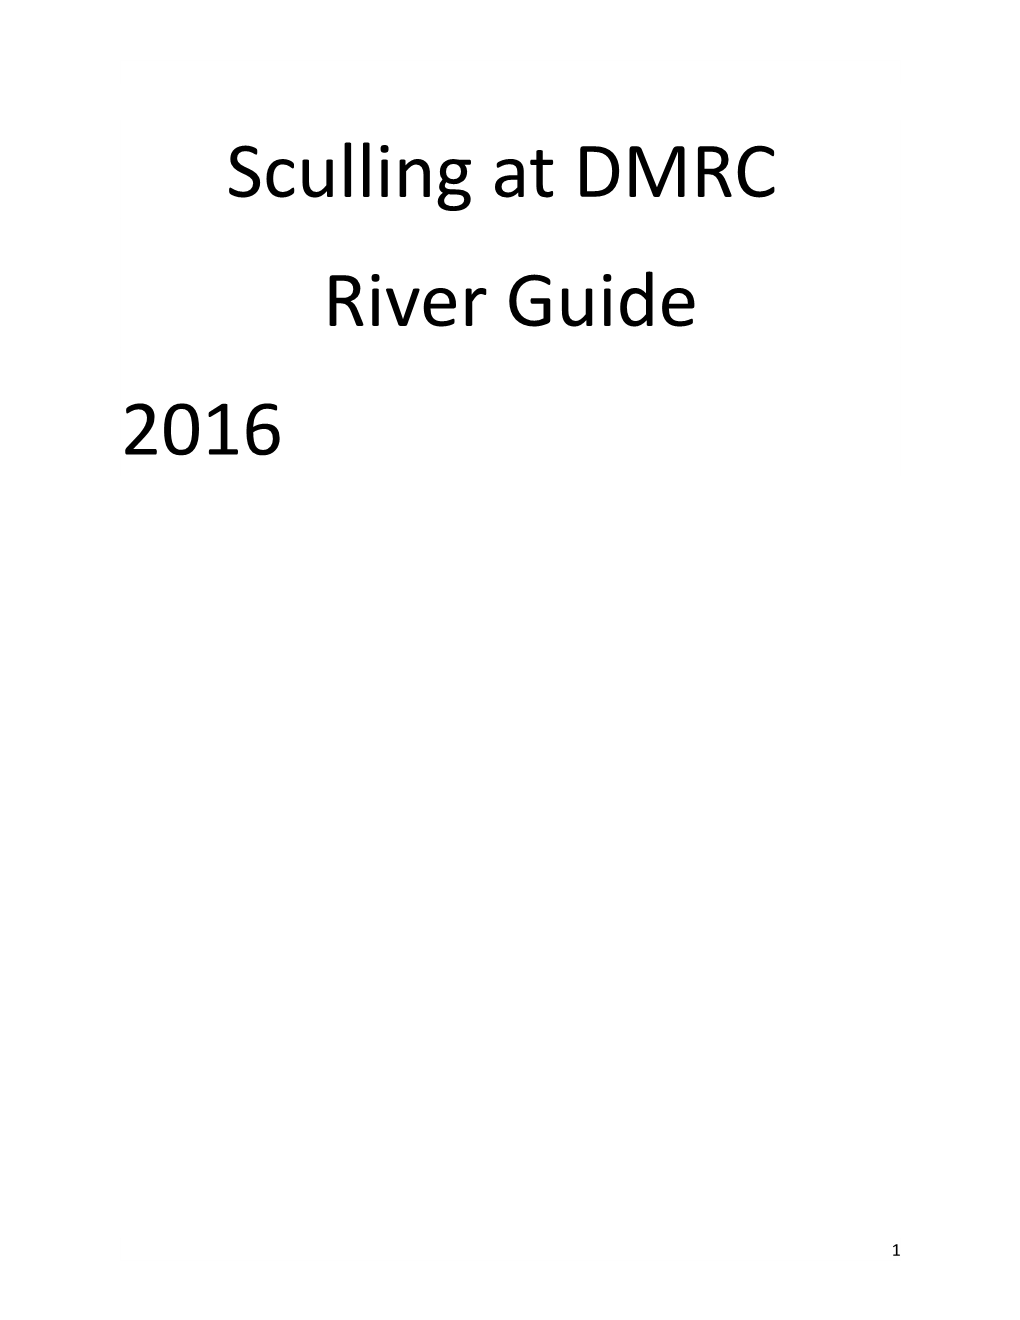 DMRC Policies for Sculling